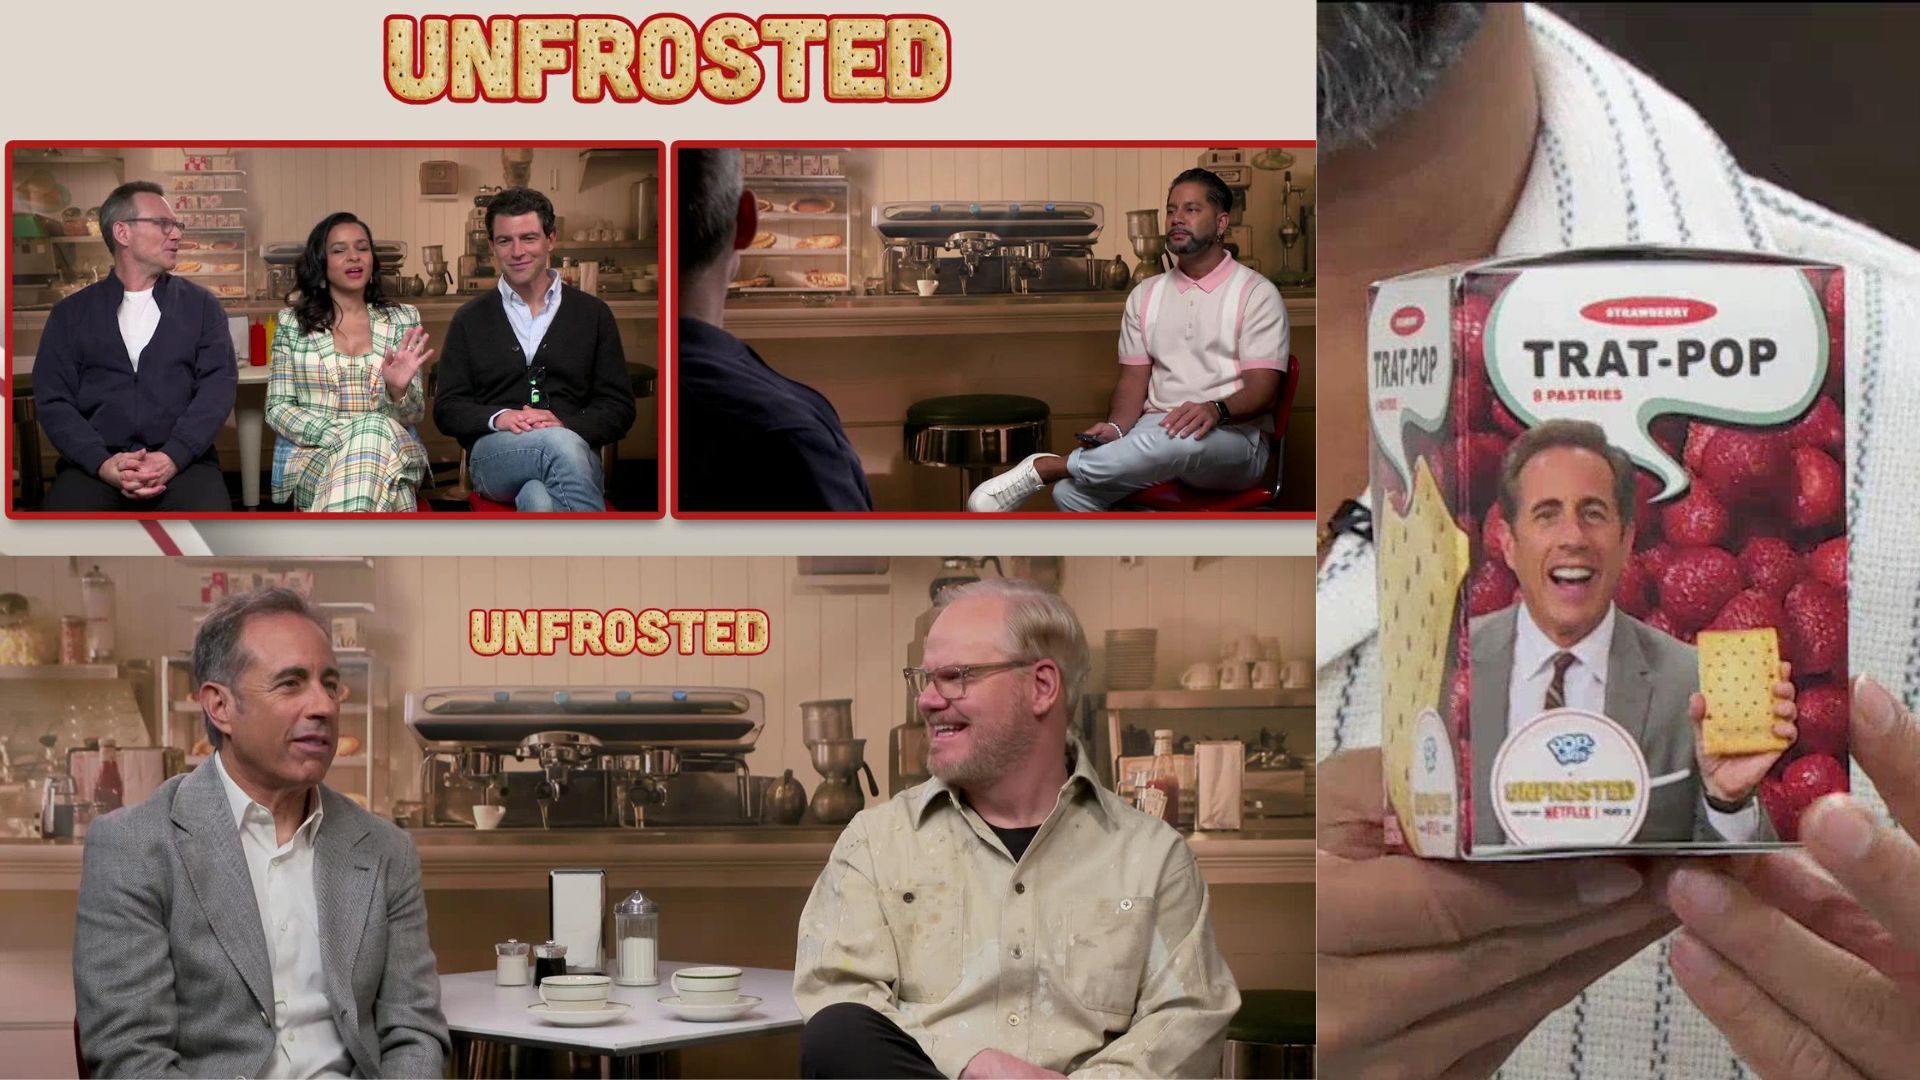 Director Jerry Seinfeld on the making of Pop-Tart film 'Unfrosted'